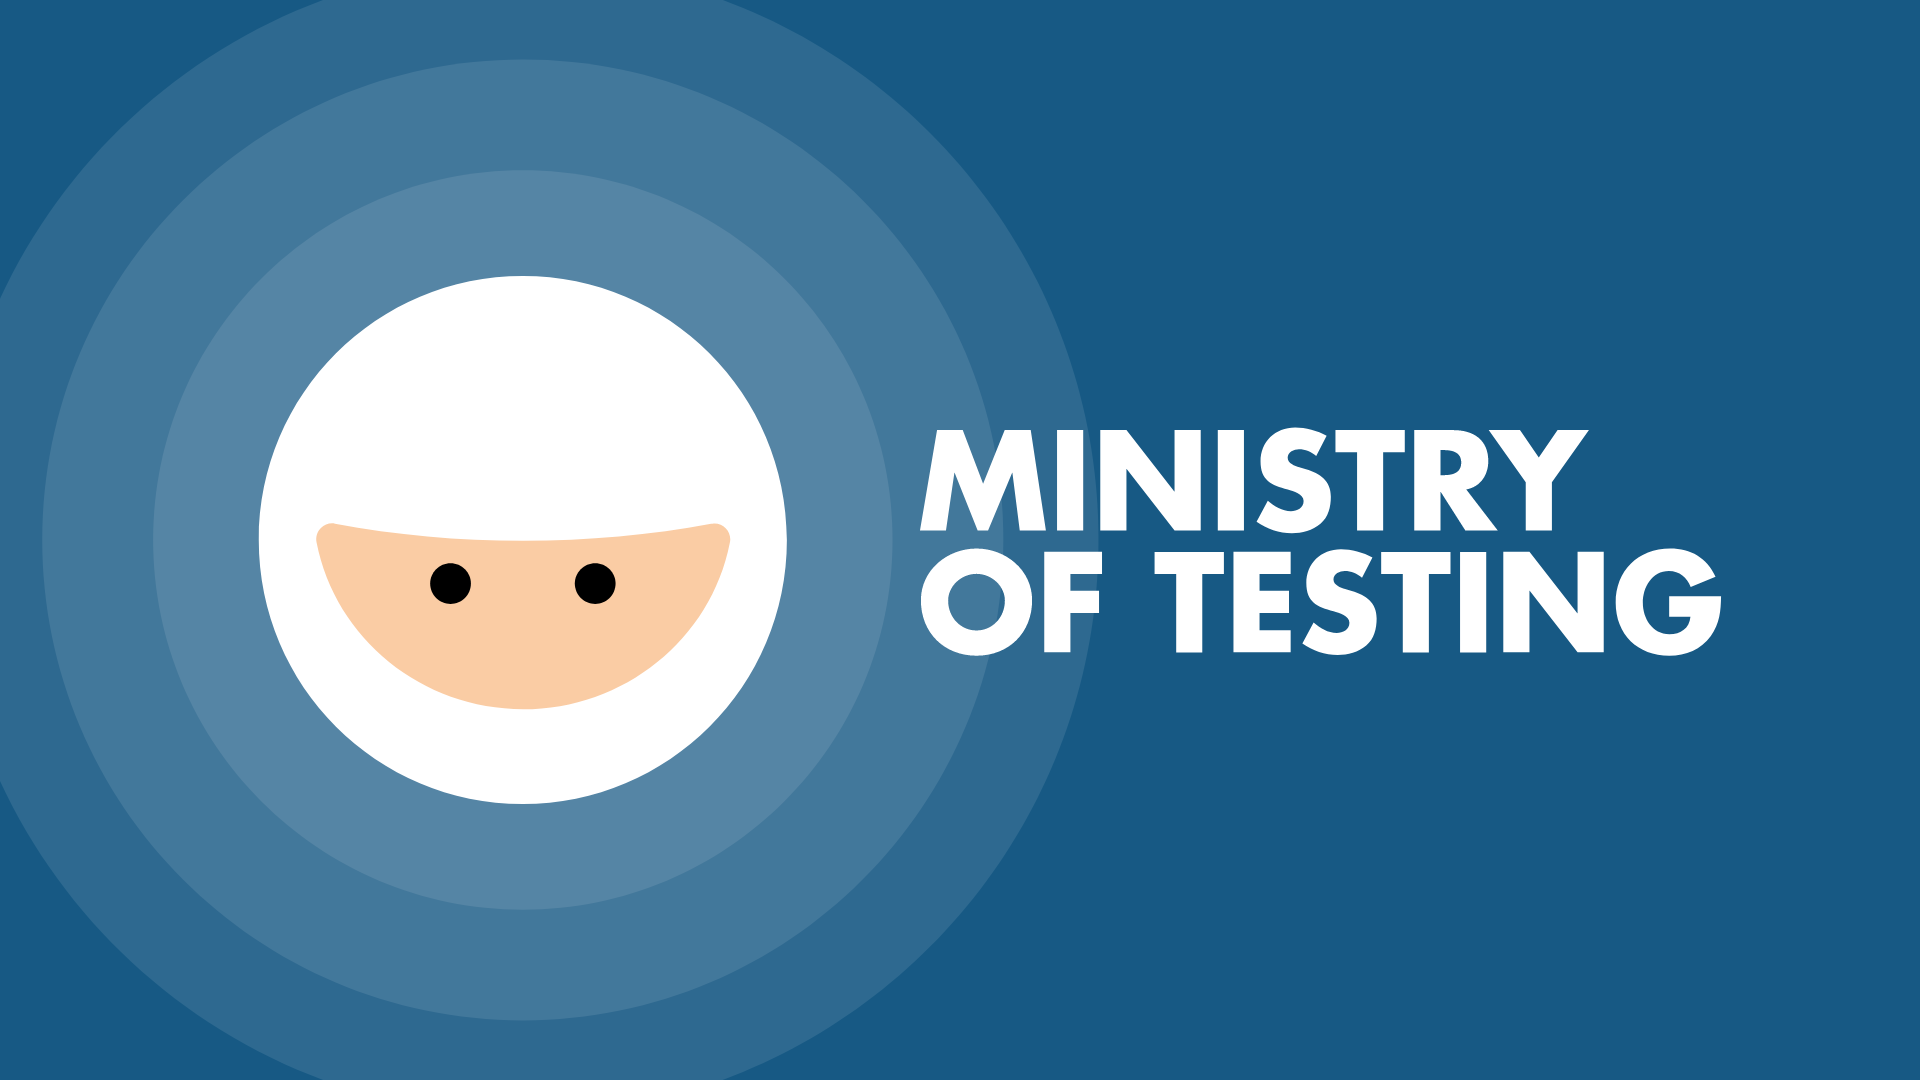 Gamification and Software Testing